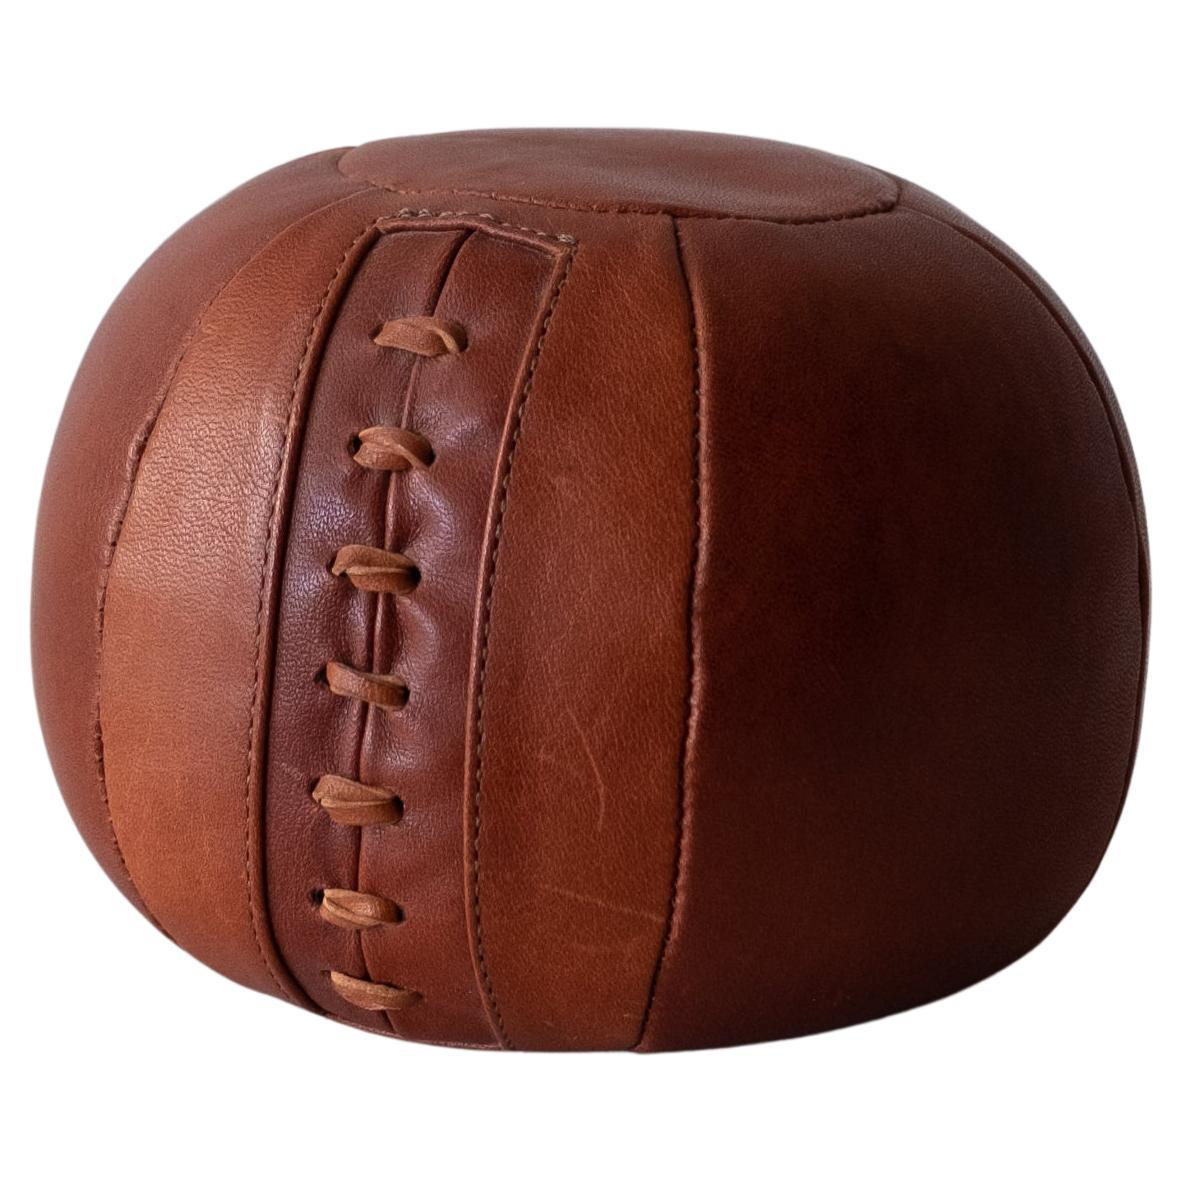 Cognac Leather Medicine Ball Paperweight